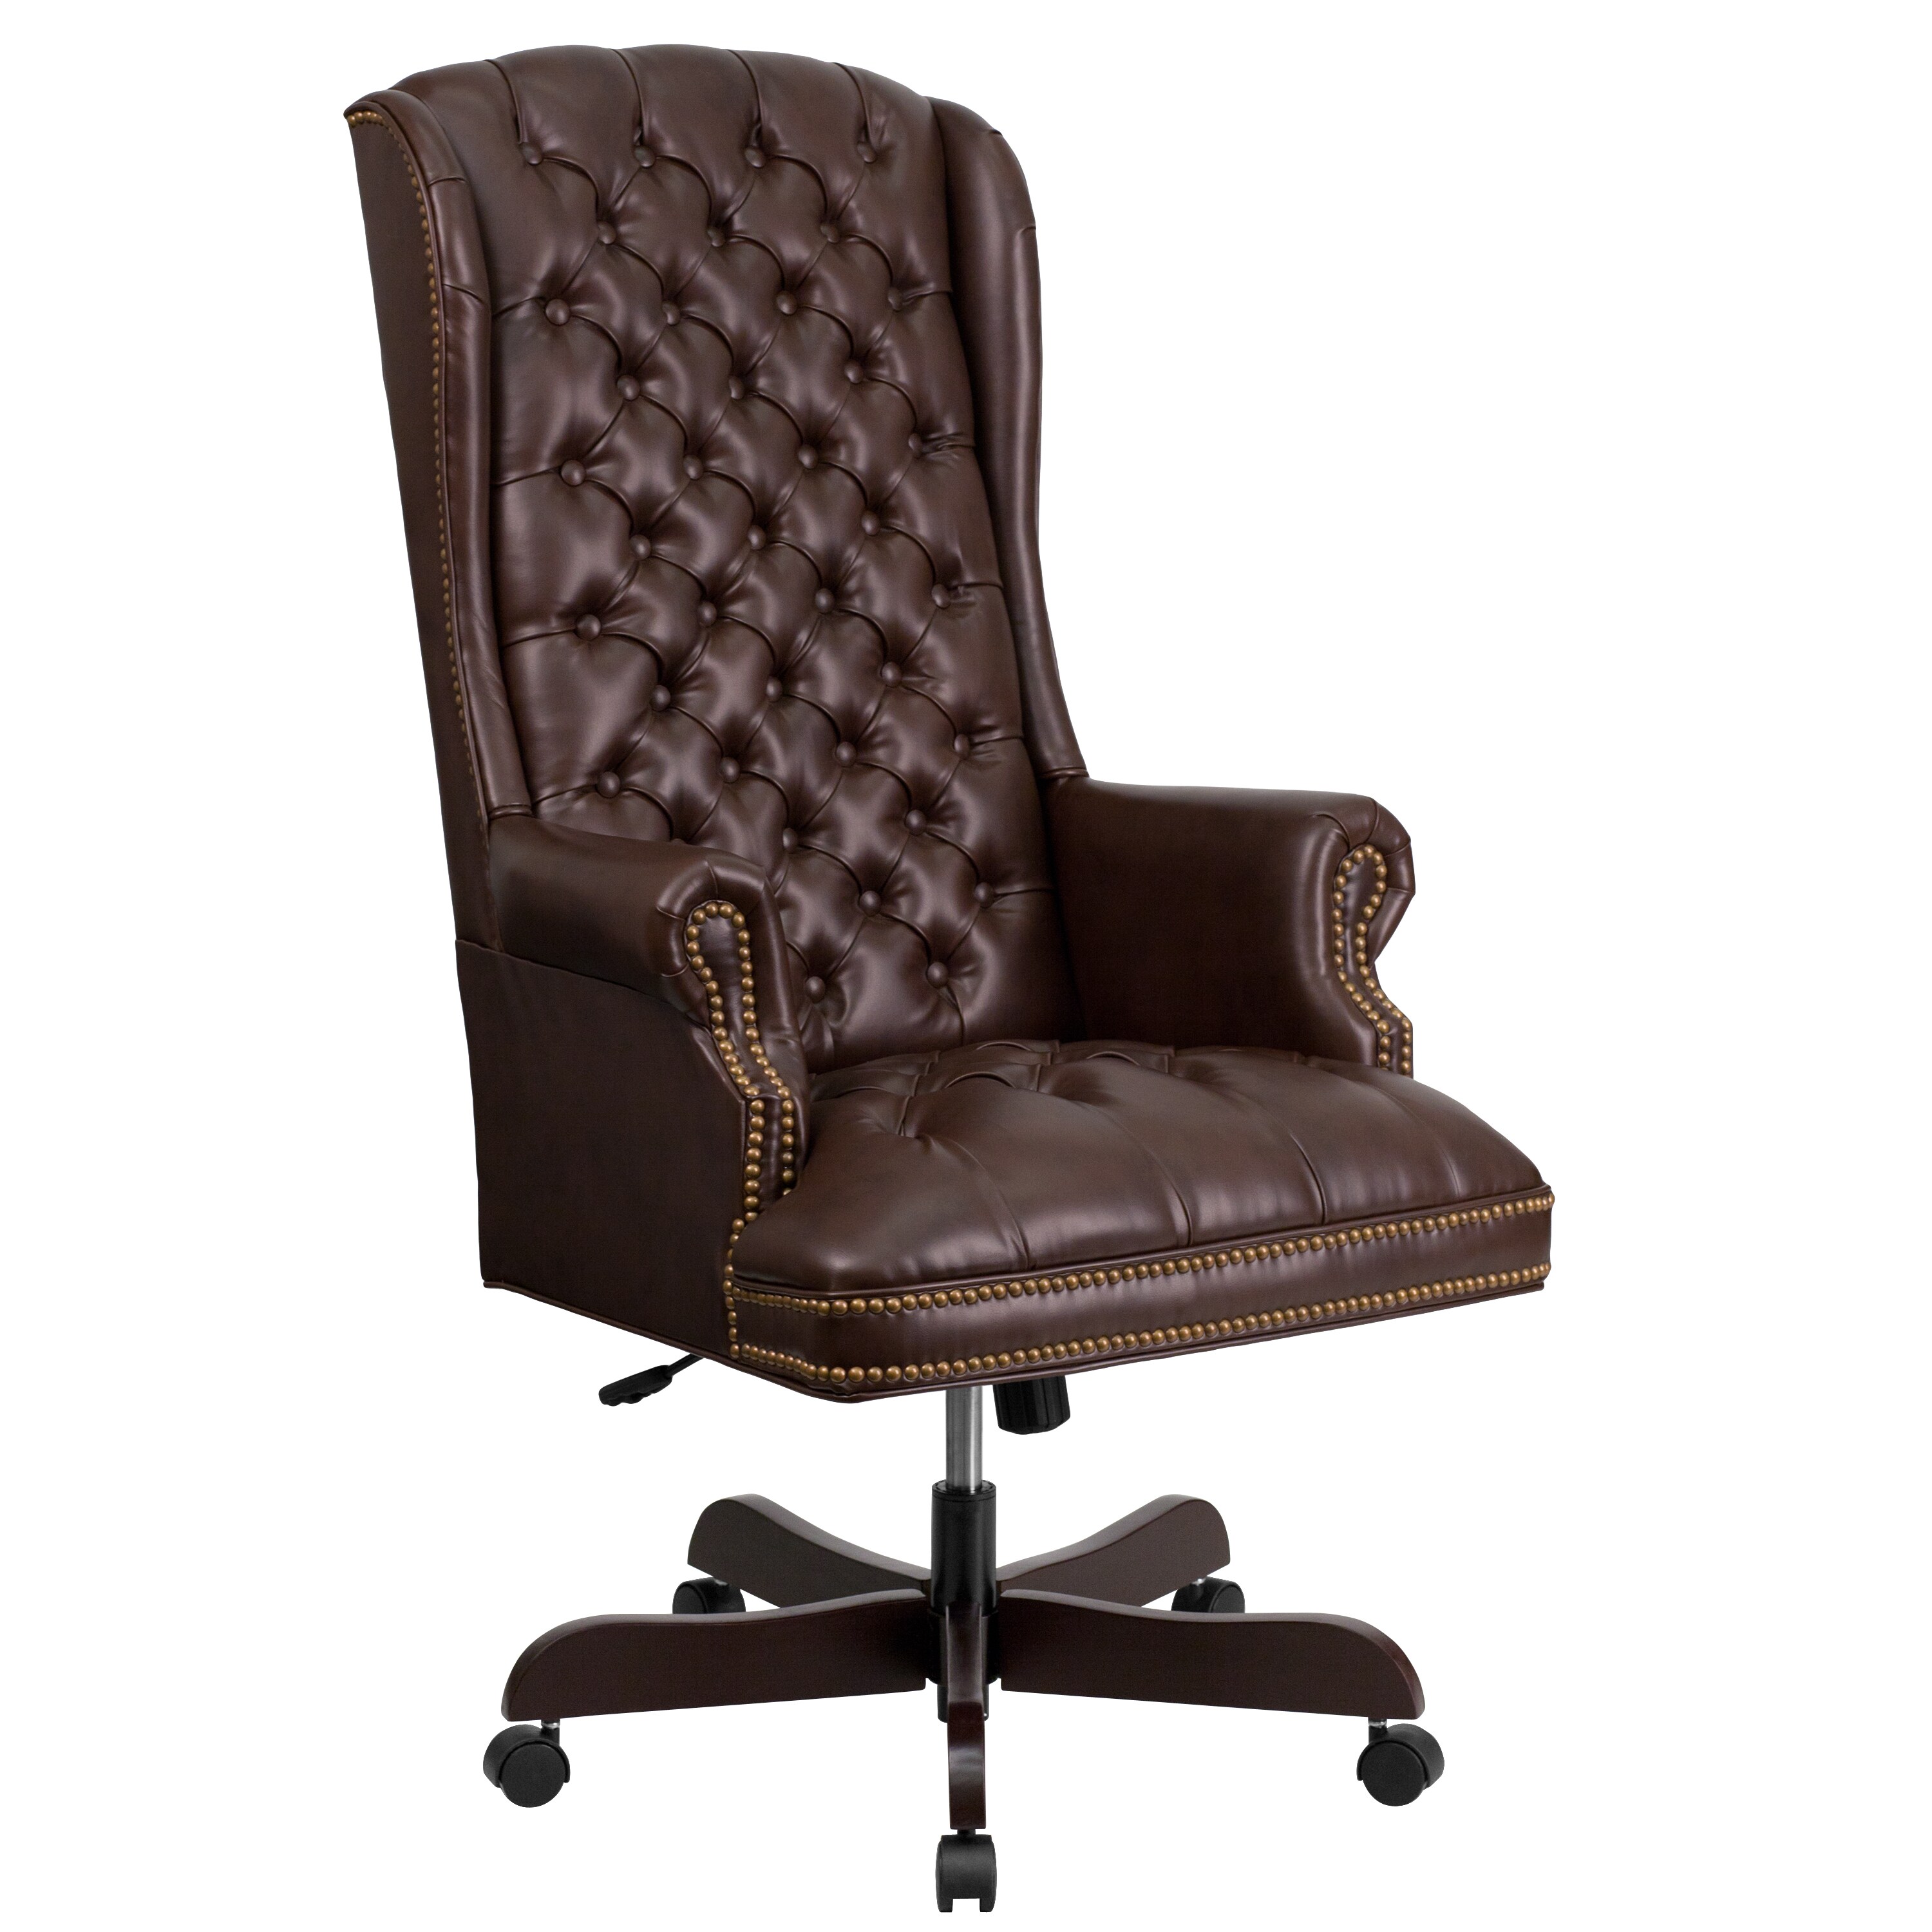 Omaha Button Tufted Brown Leather Executive Adjustable Swivel Office Chair